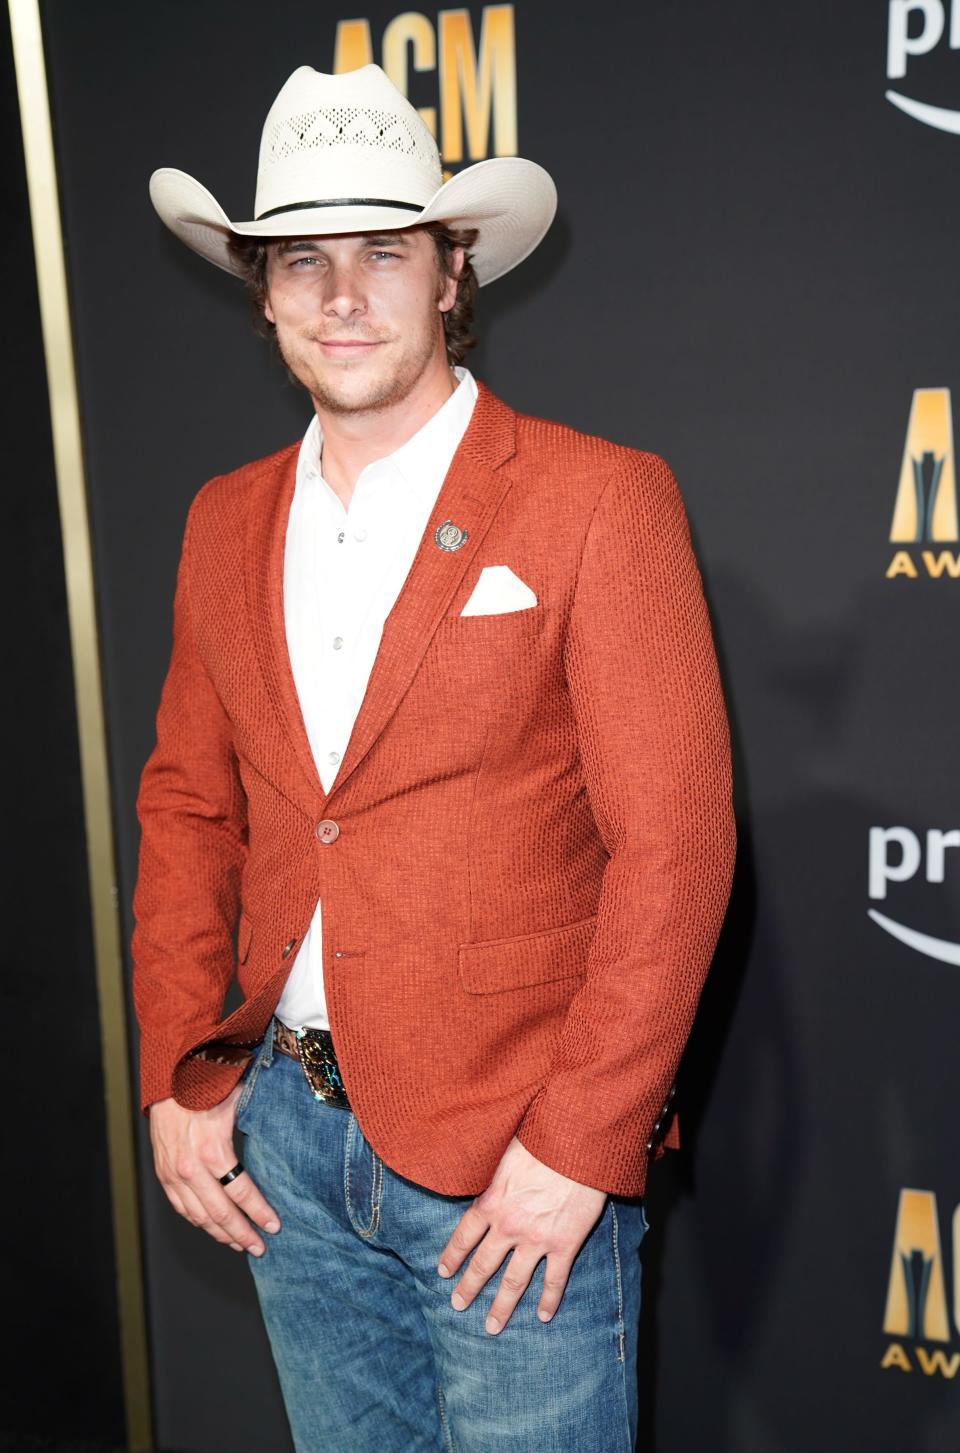 Randall King arrives for the 2023 ACM Awards in Frisco Texas,